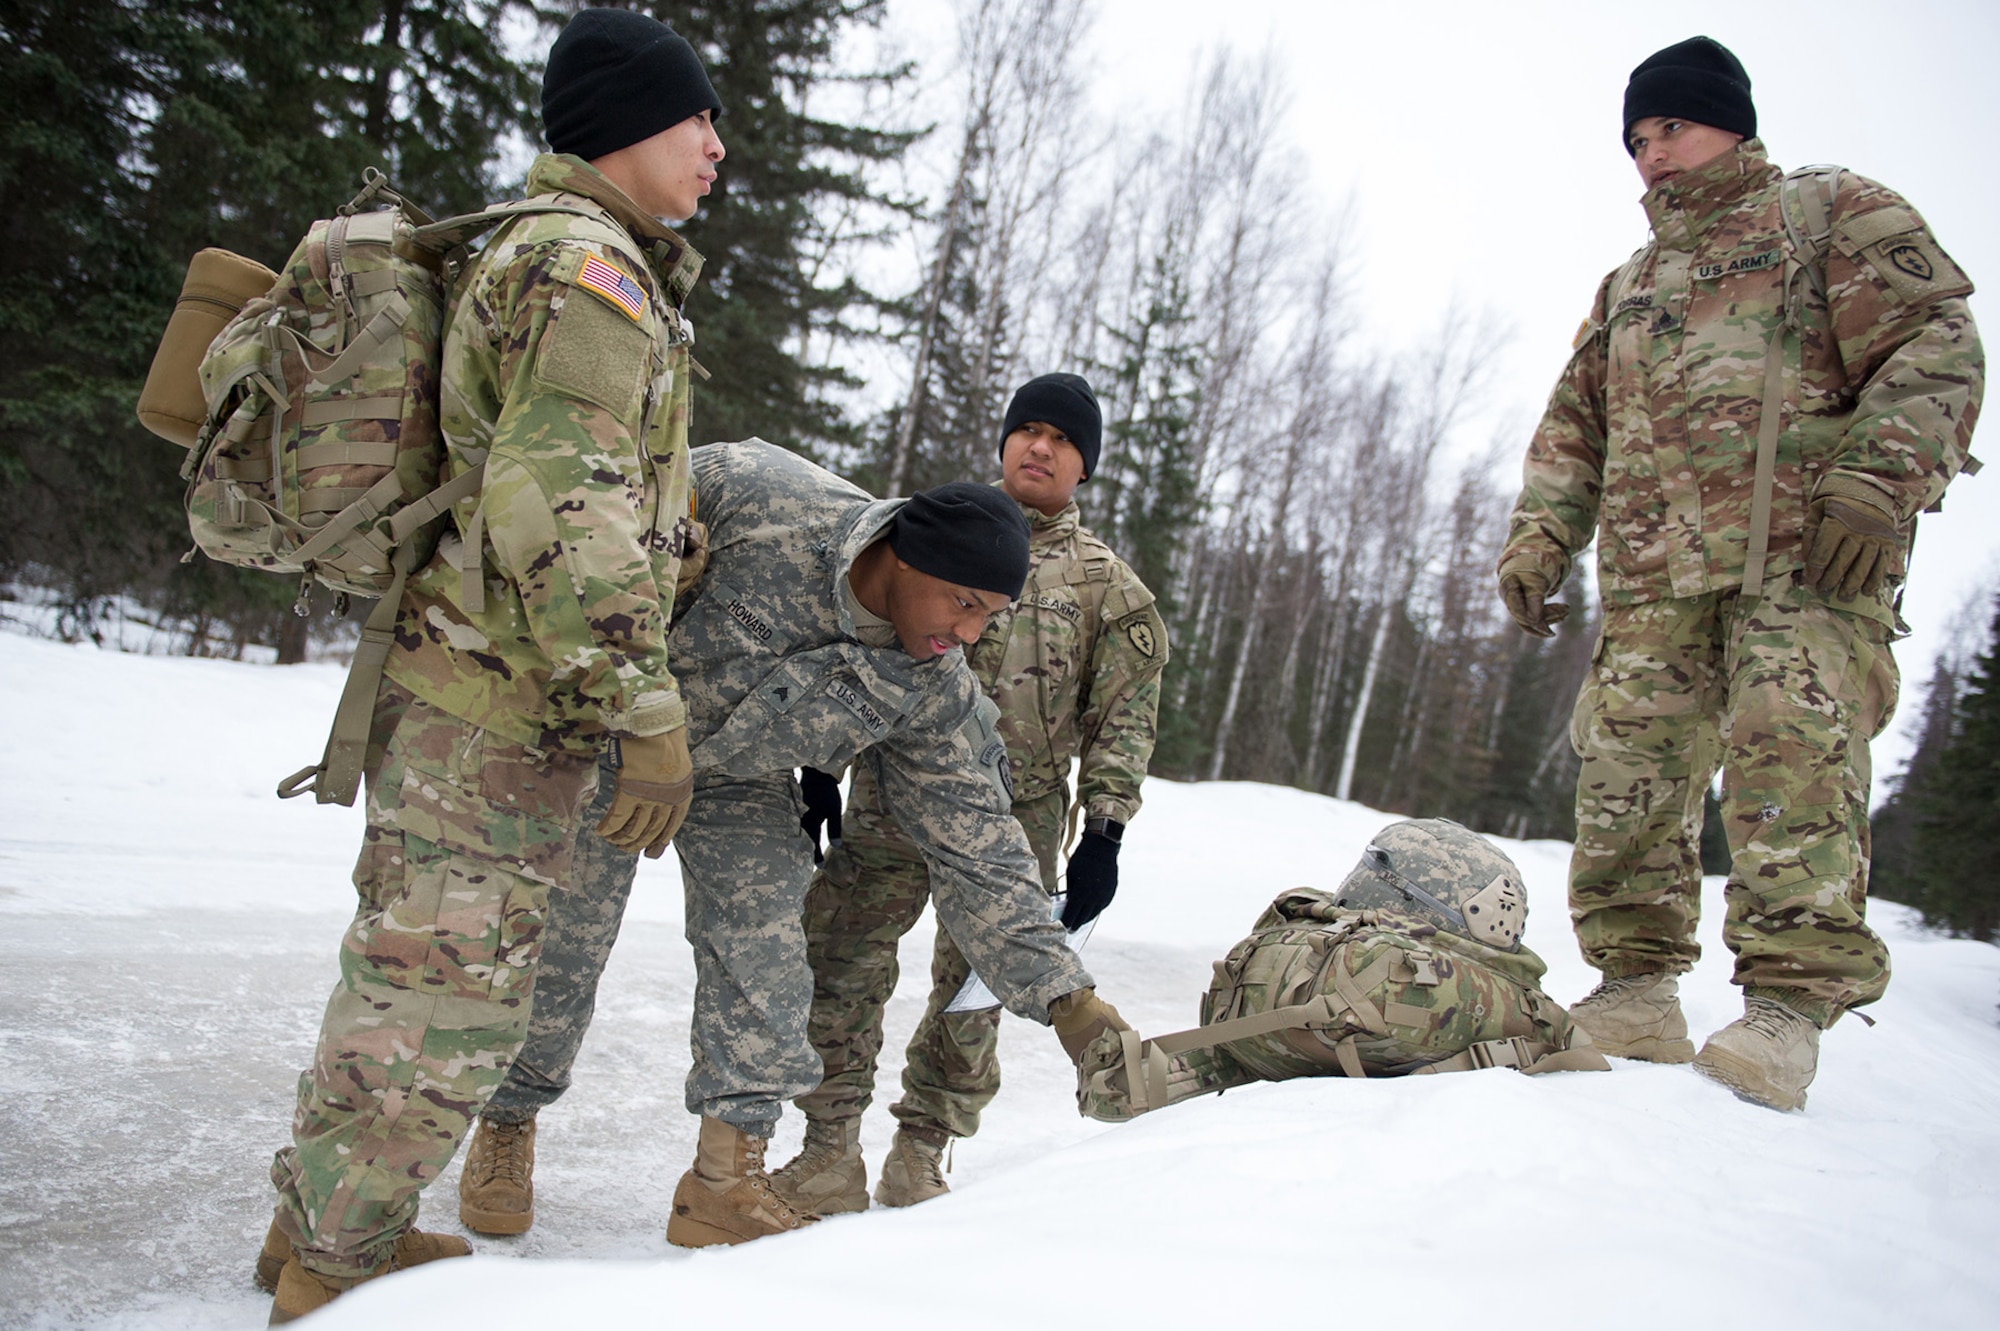 Paratroopers assigned to the 4th Infantry Brigade Combat Team (Airborne), 25th Infantry Division, U.S. Army Alaska, prepare to move out during a land navigation course on Joint Base Elmendorf-Richardson, Alaska, April 4, 2018.  The Soldiers used their skills to plot courses using a lensatic compass, protractor, and a 1:25,000 scale map to navigate to, and locate points using provided grid coordinates within a predetermined time.